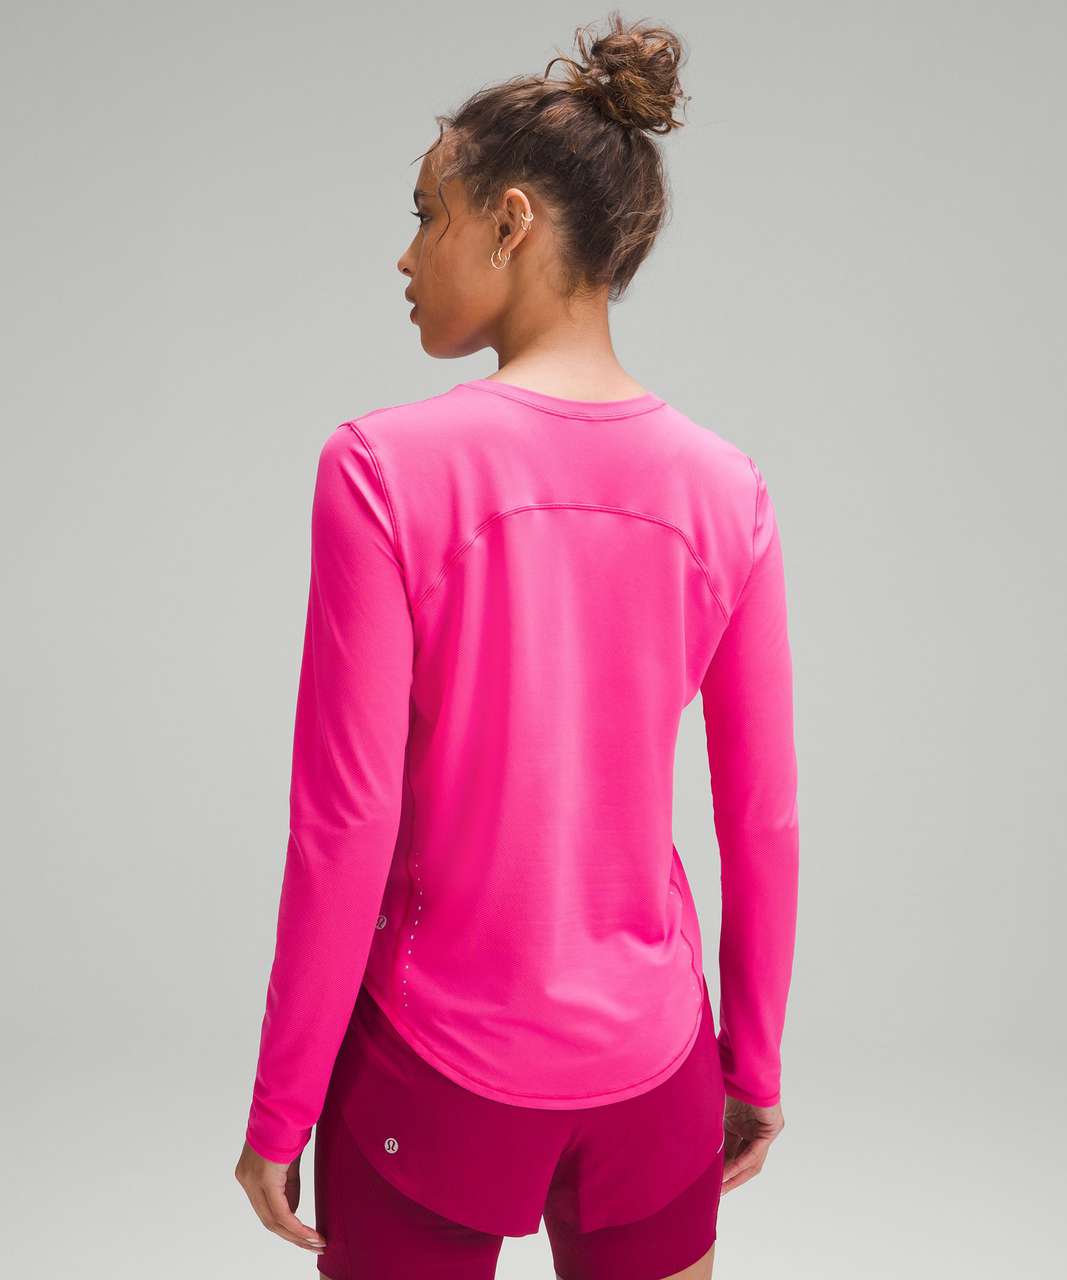 Lululemon La Tight-to-body Ruched Long Sleeve Shirt - Pink